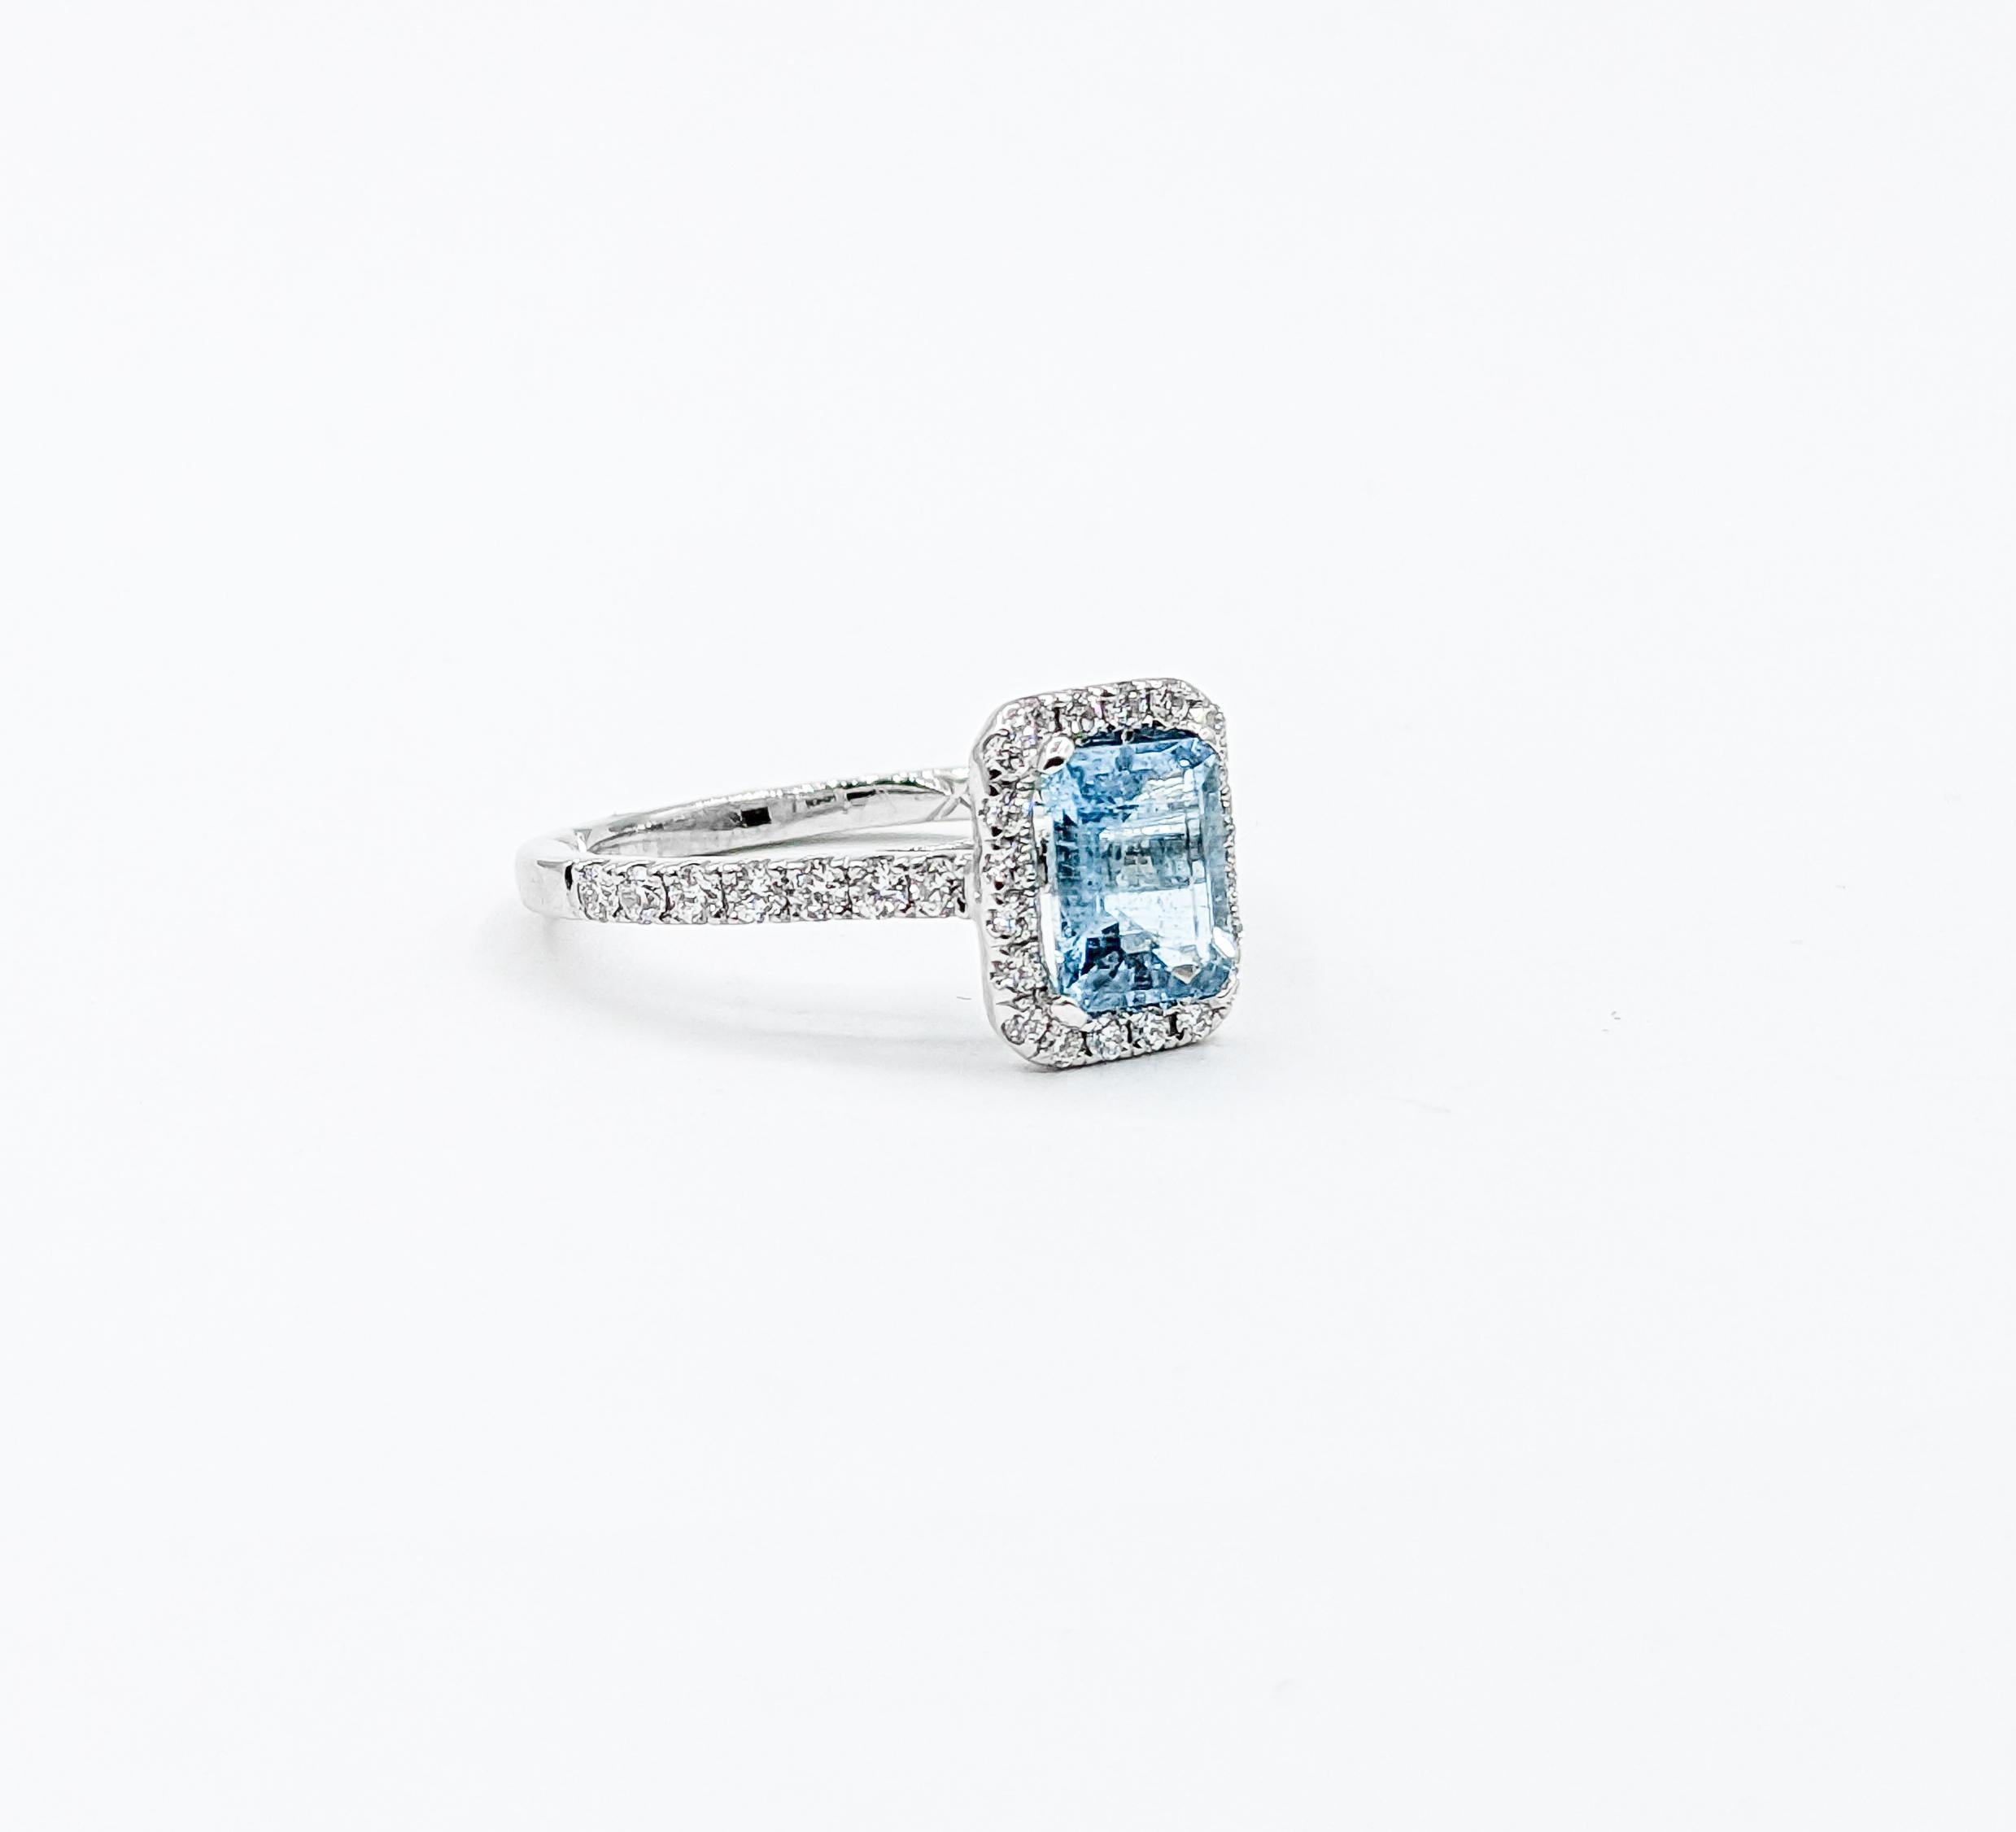 Classic Halo Aquamarine & Diamond Engagement Ring in 14K White Gold

Presenting this stunning aquamarine ring, intricately fashioned from 14k white gold with shimmering diamond details. This ring highlights a bright 1.08ct Aquamarine centerpiece in